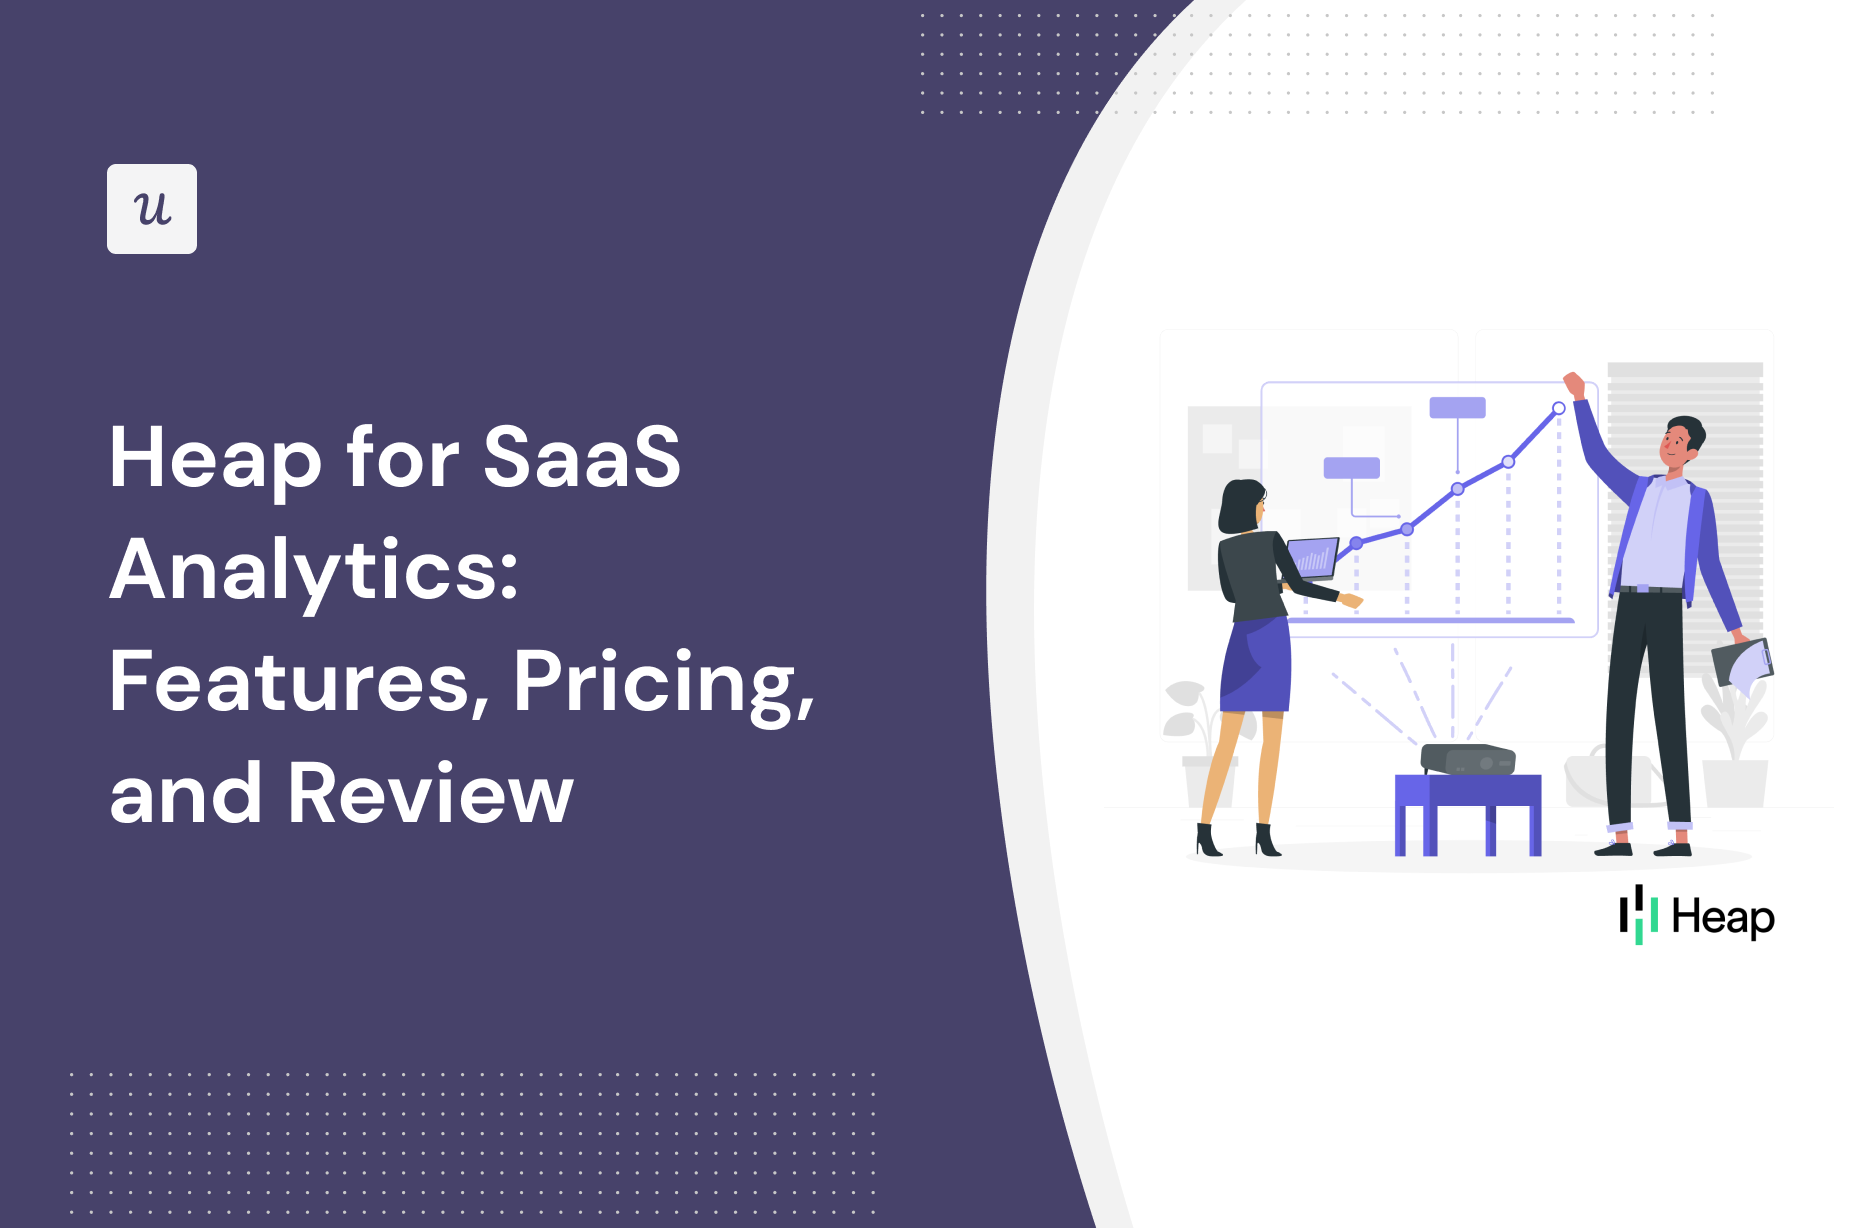 Heap for SaaS Analytics: Features, Pricing, and Review